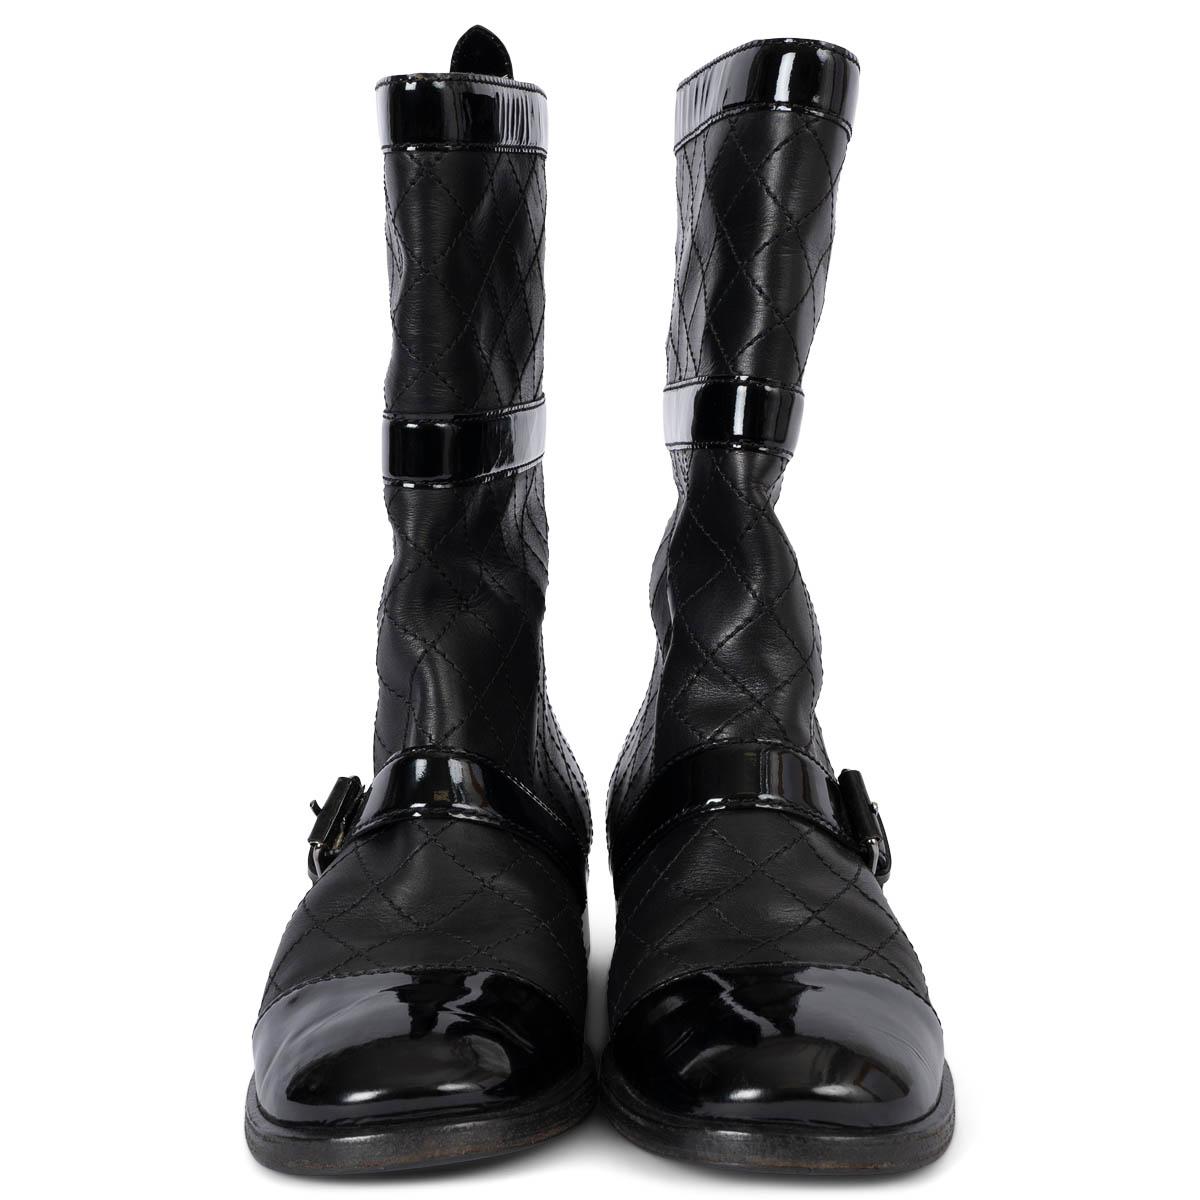 100% authentic Chanel quilted vintage biker boots in black calfskin with a classic patent leather cap toe and trim. Have been worn and are in excellent condition. Come with dust bag. 

Measurements
Imprinted Size	38.5
Shoe Size	38.5
Inside Sole	25cm